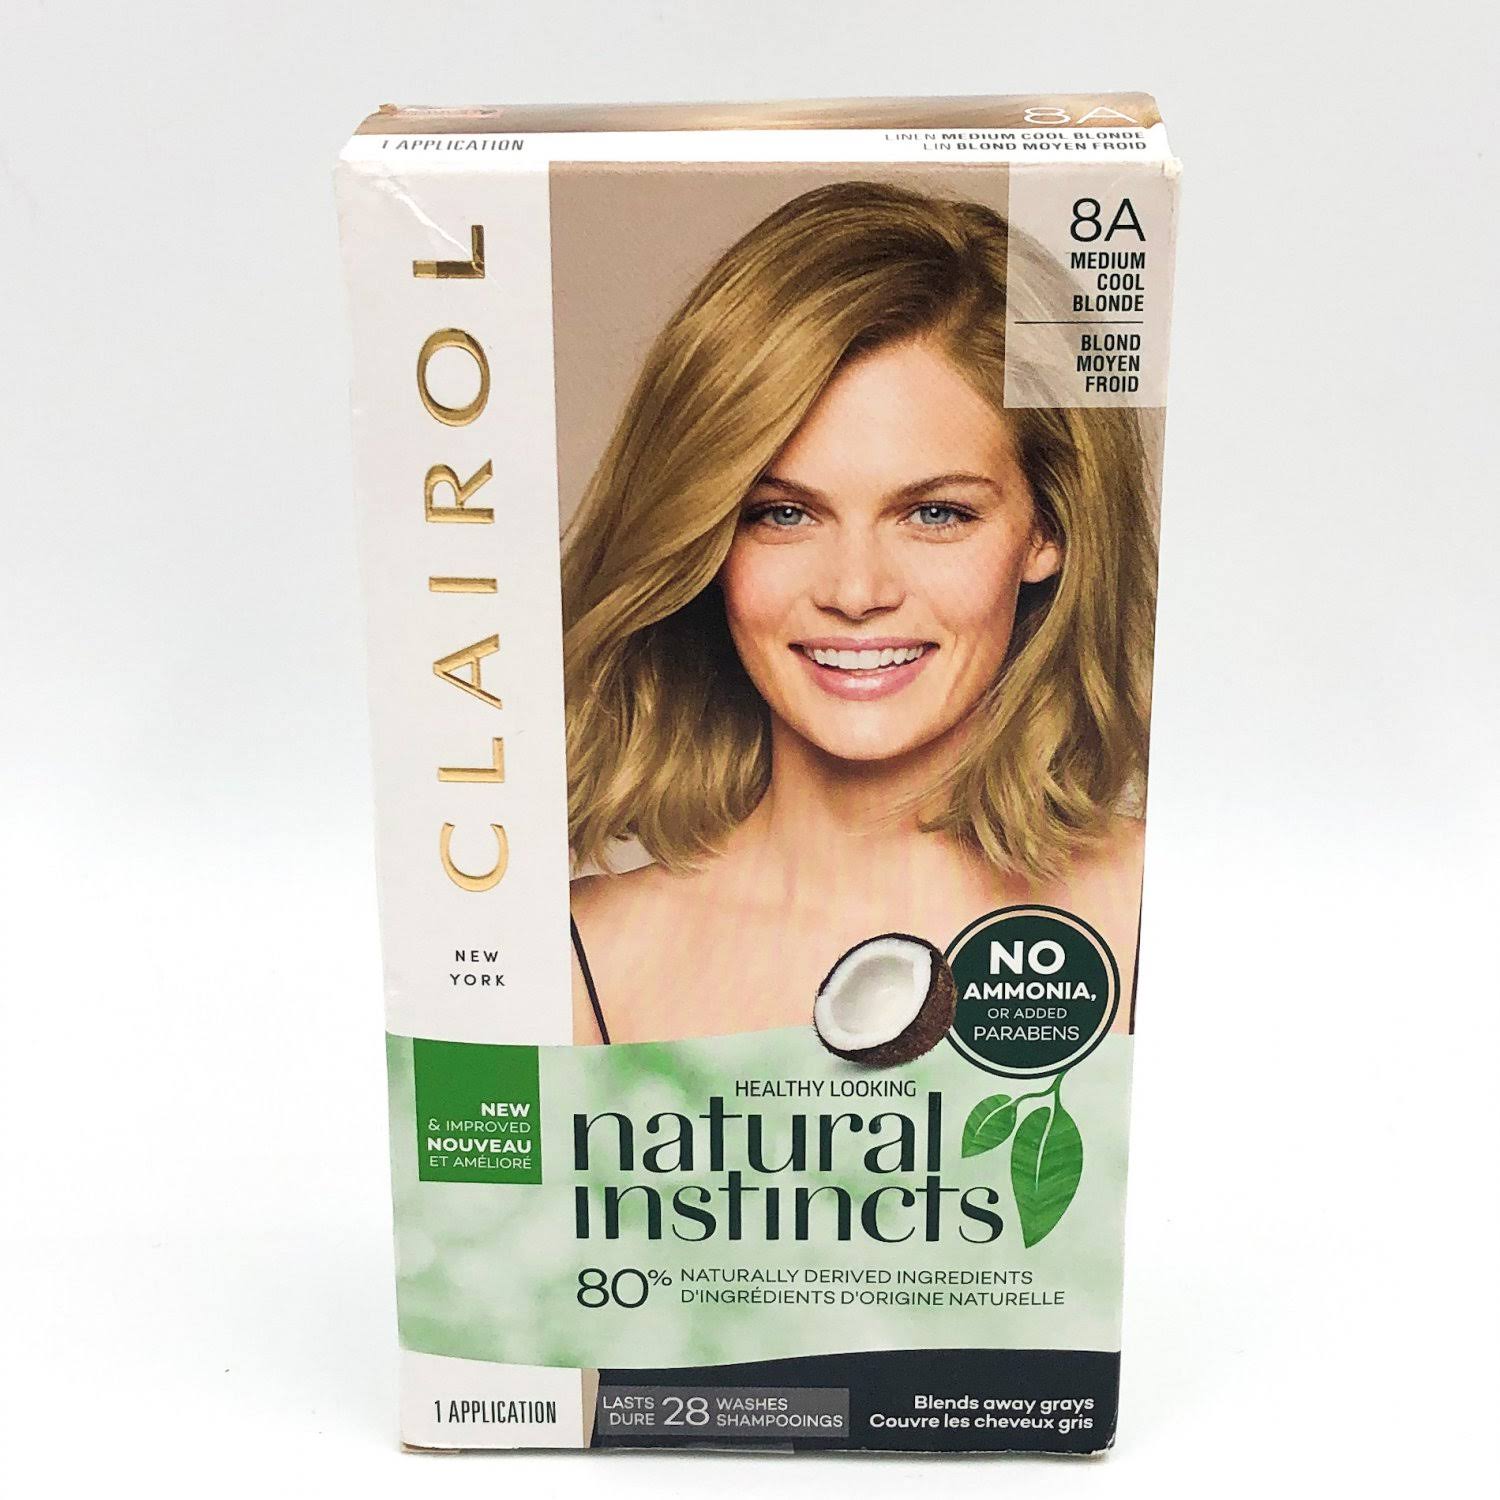 Clairol Natural Instincts 8A Linen Medium Cool Blonde Hair Color Dye